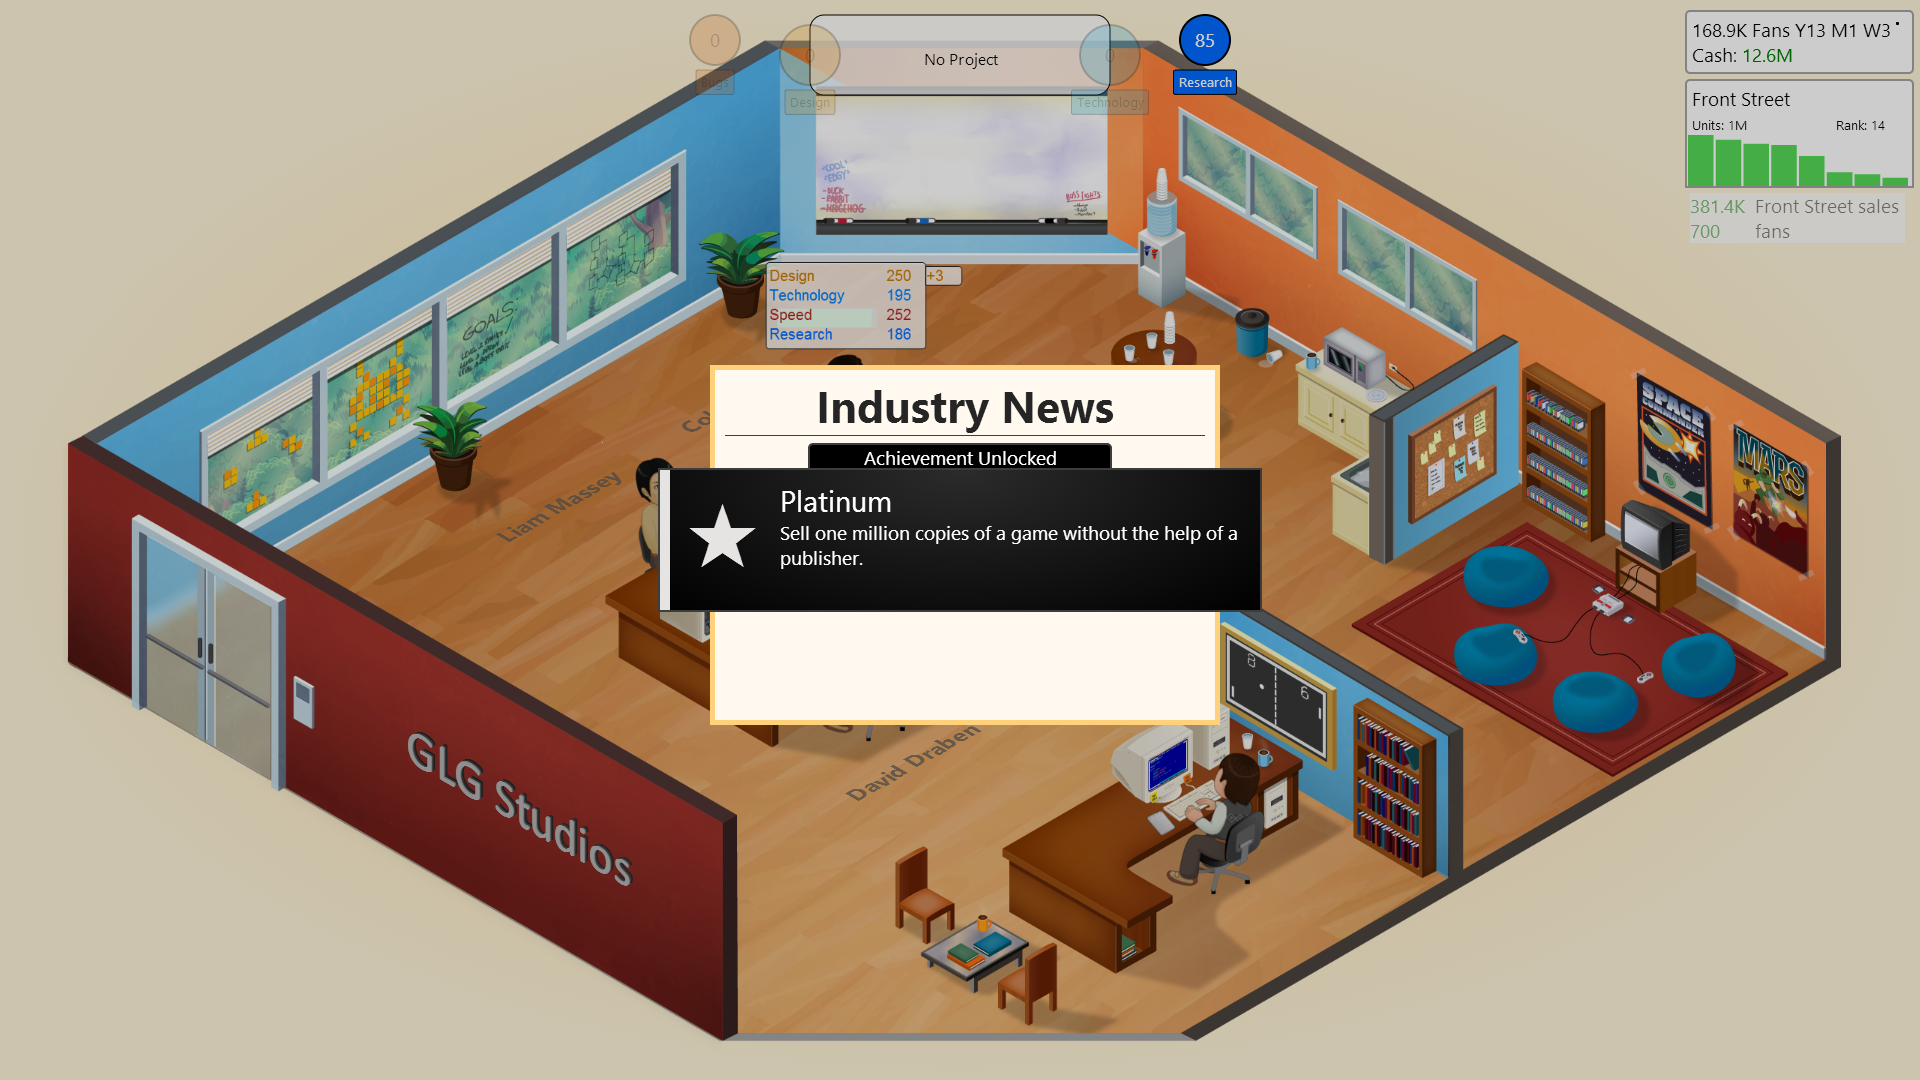 Mod games tycoon. Dev Tycoon игра. Game Dev Tycoons PC. Game Dev Tycoon 2. Game Studio Tycoon.